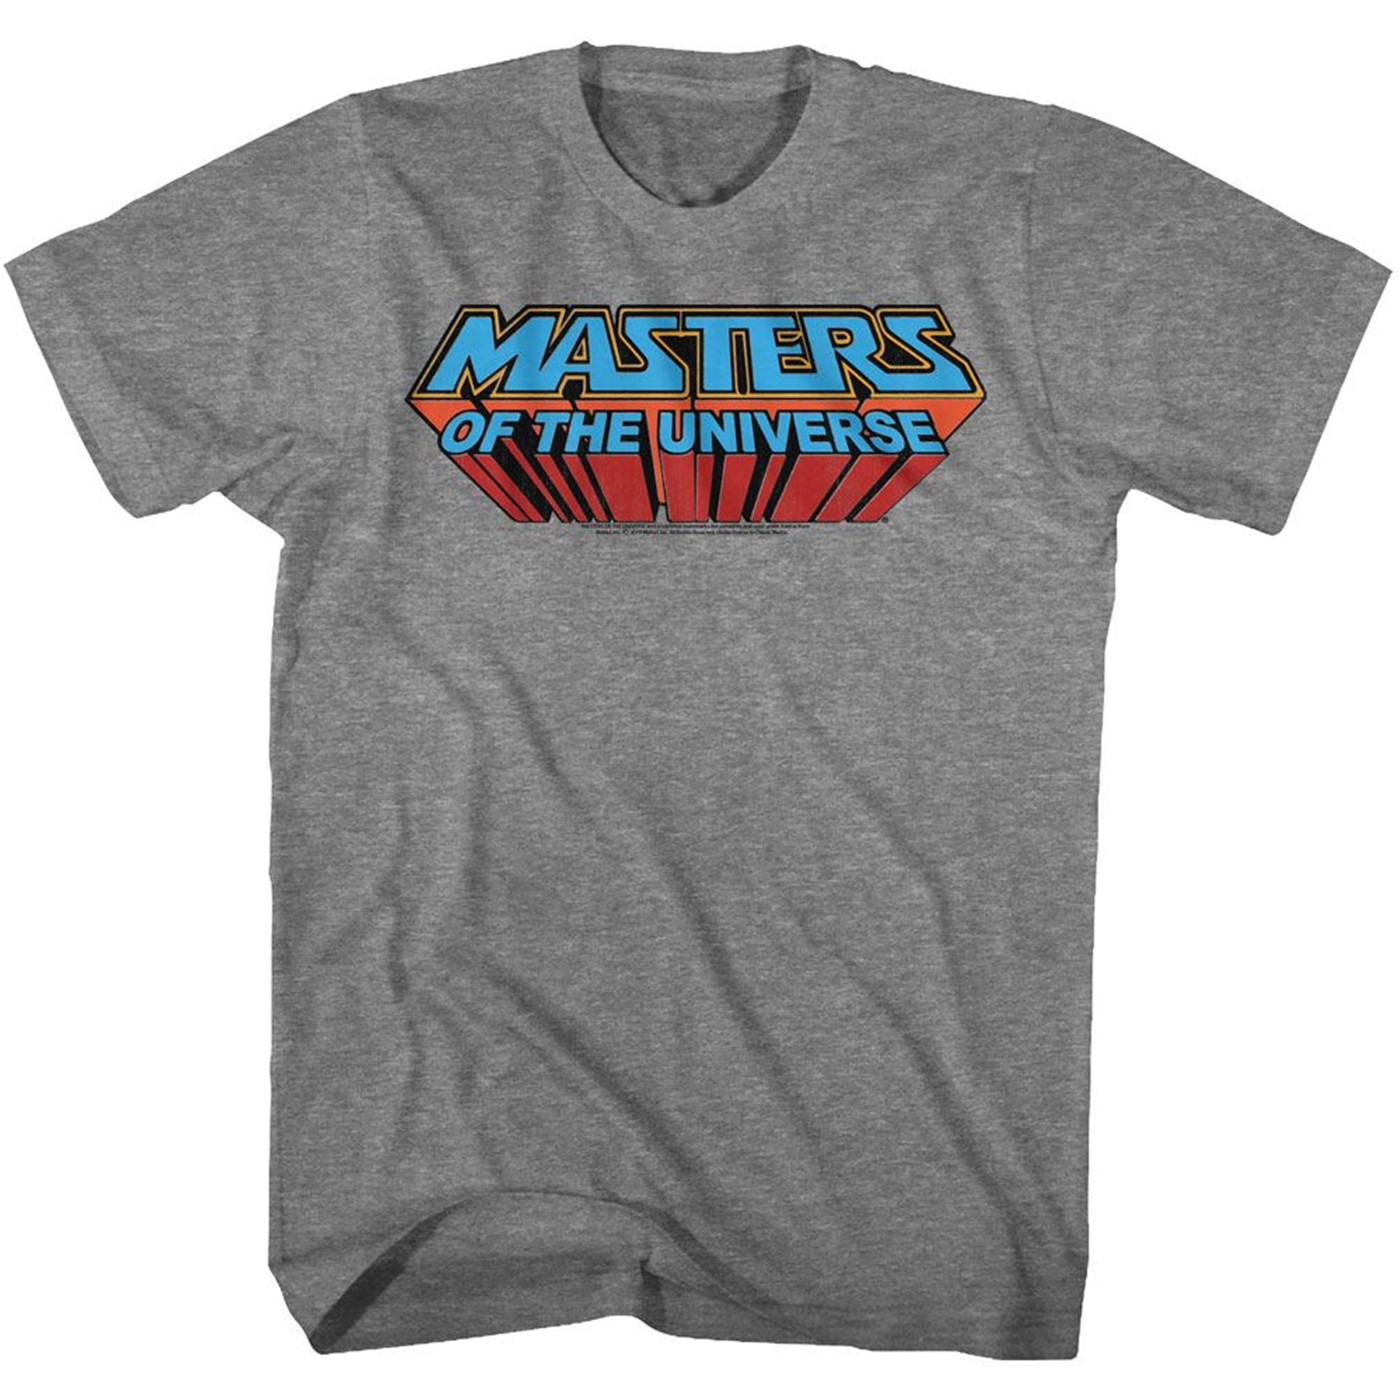 Masters of the Universe He-Man Logo T-Shirt